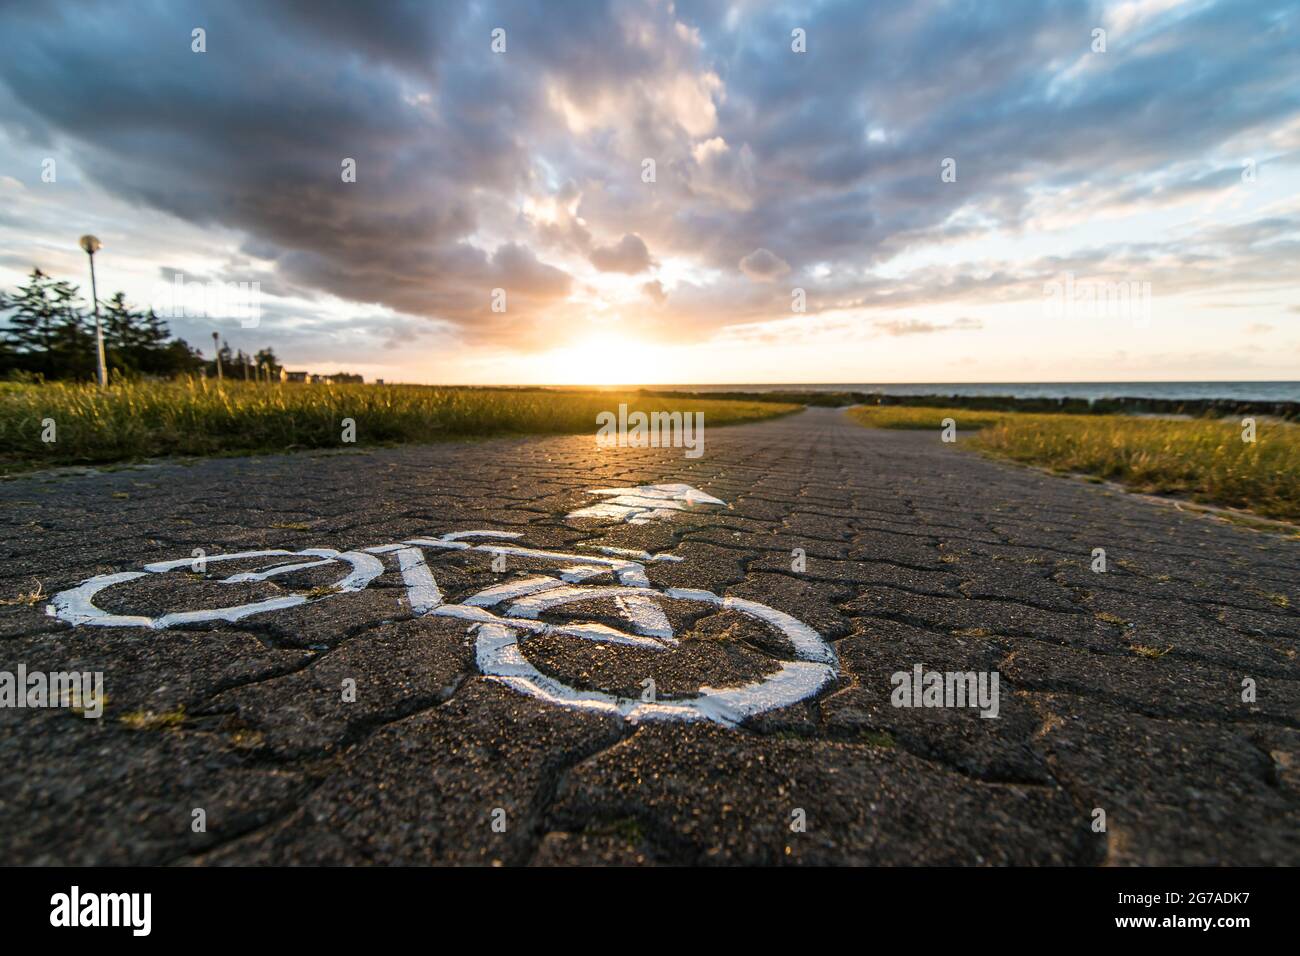 Bicycle path at sunset in autumn in Schoenberg, Kiel, Germany. Stock Photo